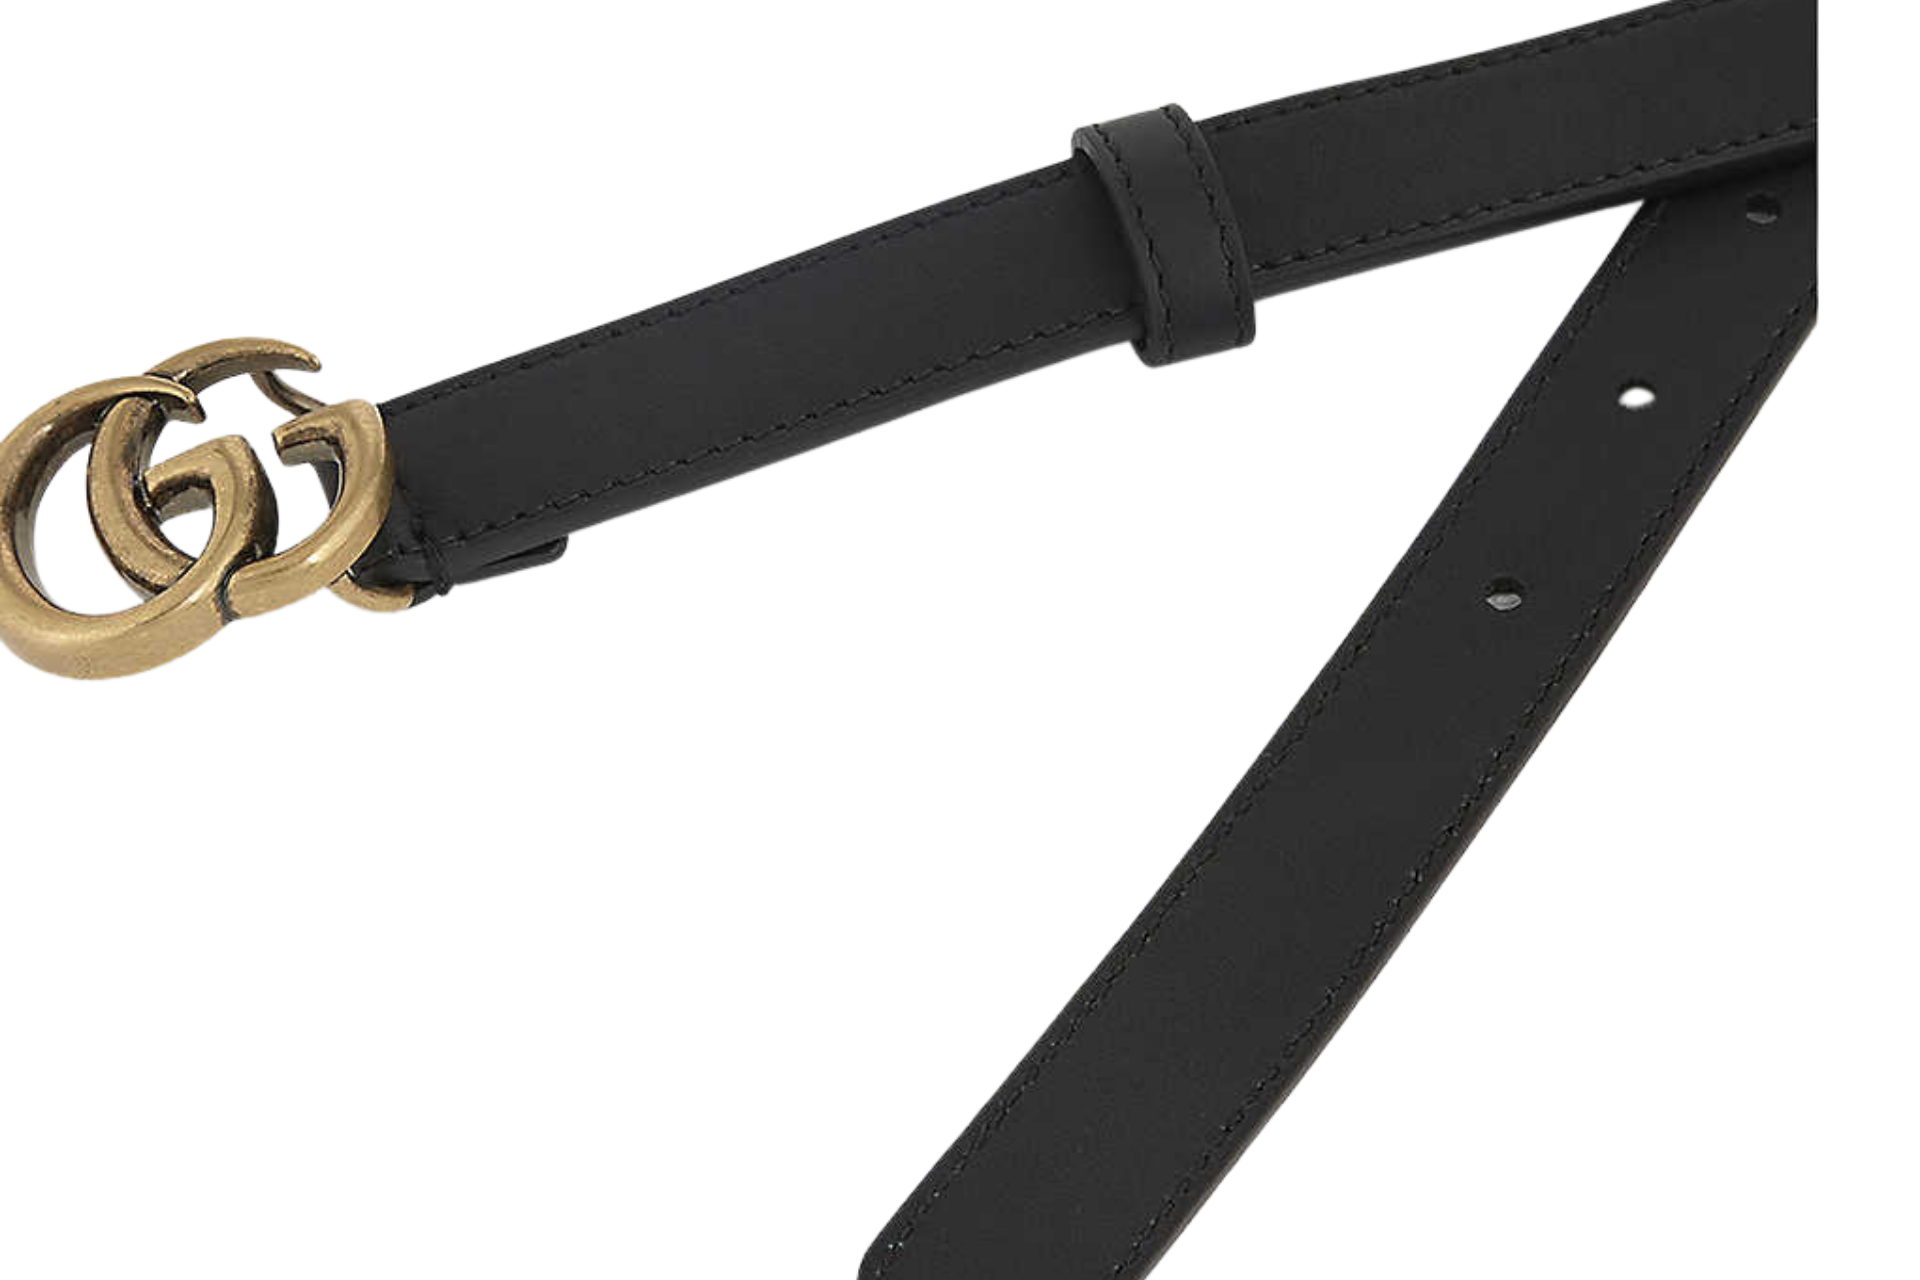 Gucci Slim Leather Belt with Double G Buckle 85 cm